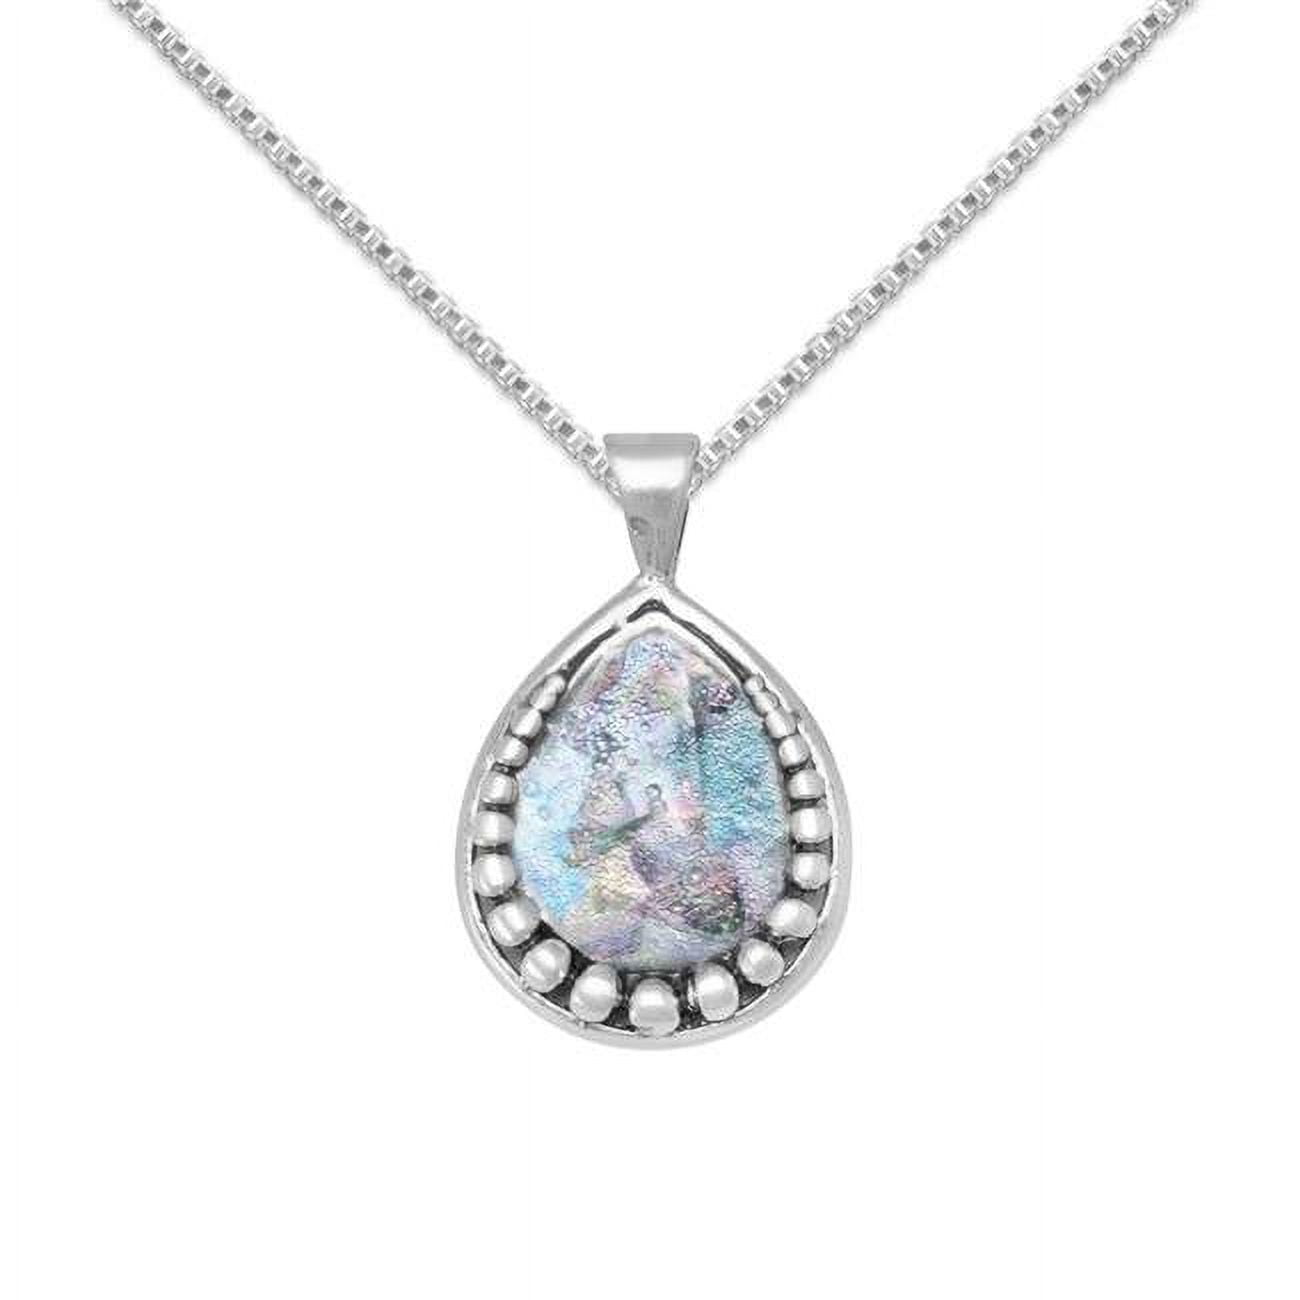 73444-22 22 In. Sterling Silver Pear Shape Roman Glass Pendant With 1.5 Mm Box Chain